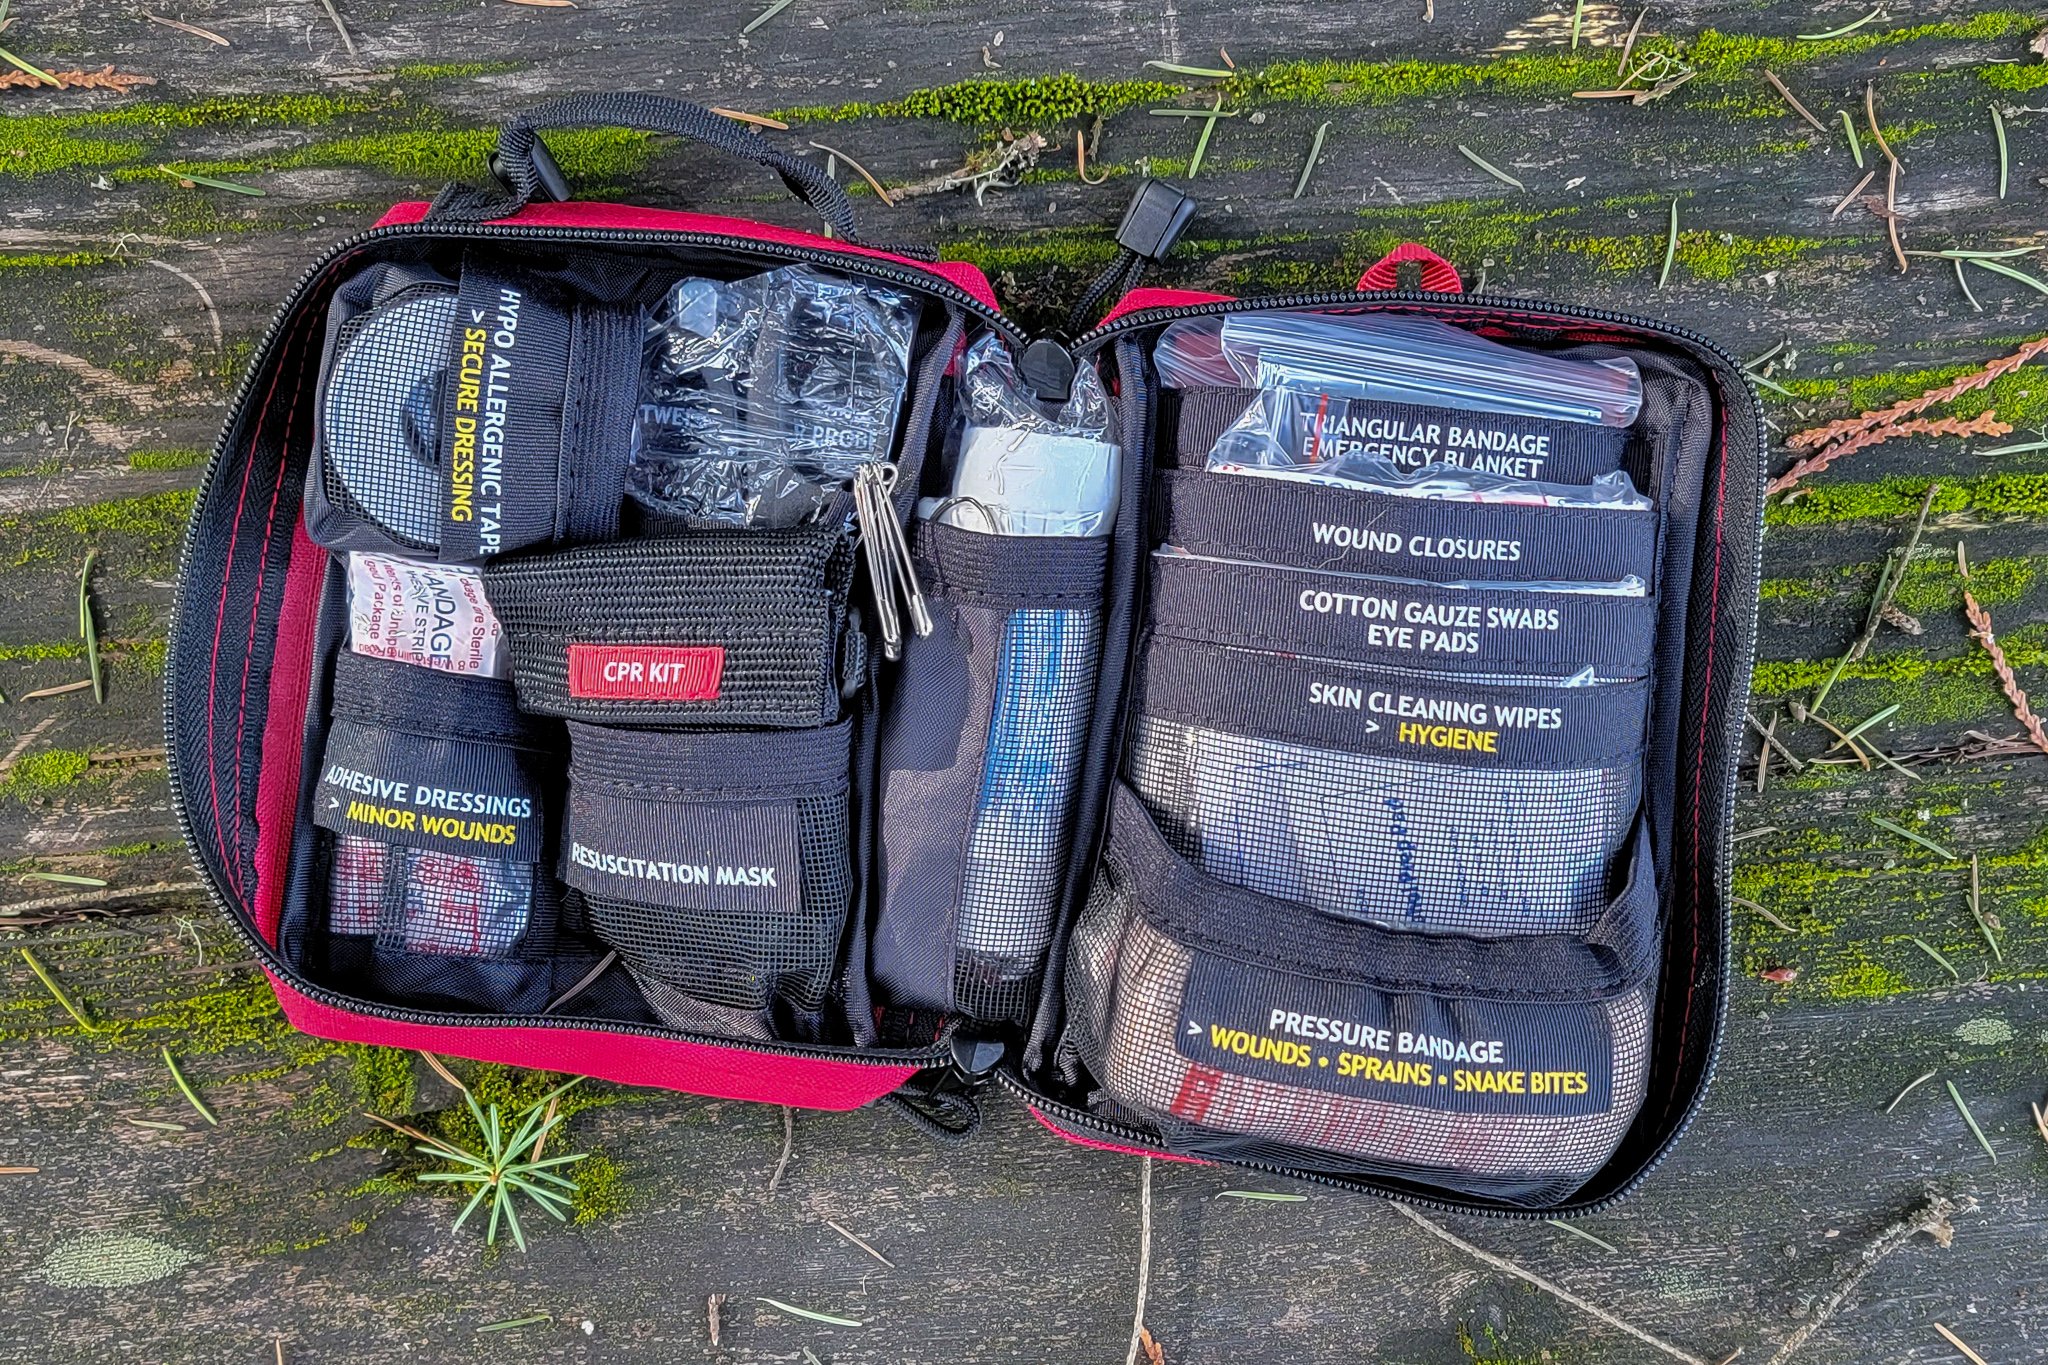 Top-down view of the Surviveware Small First Aid Kit's contents